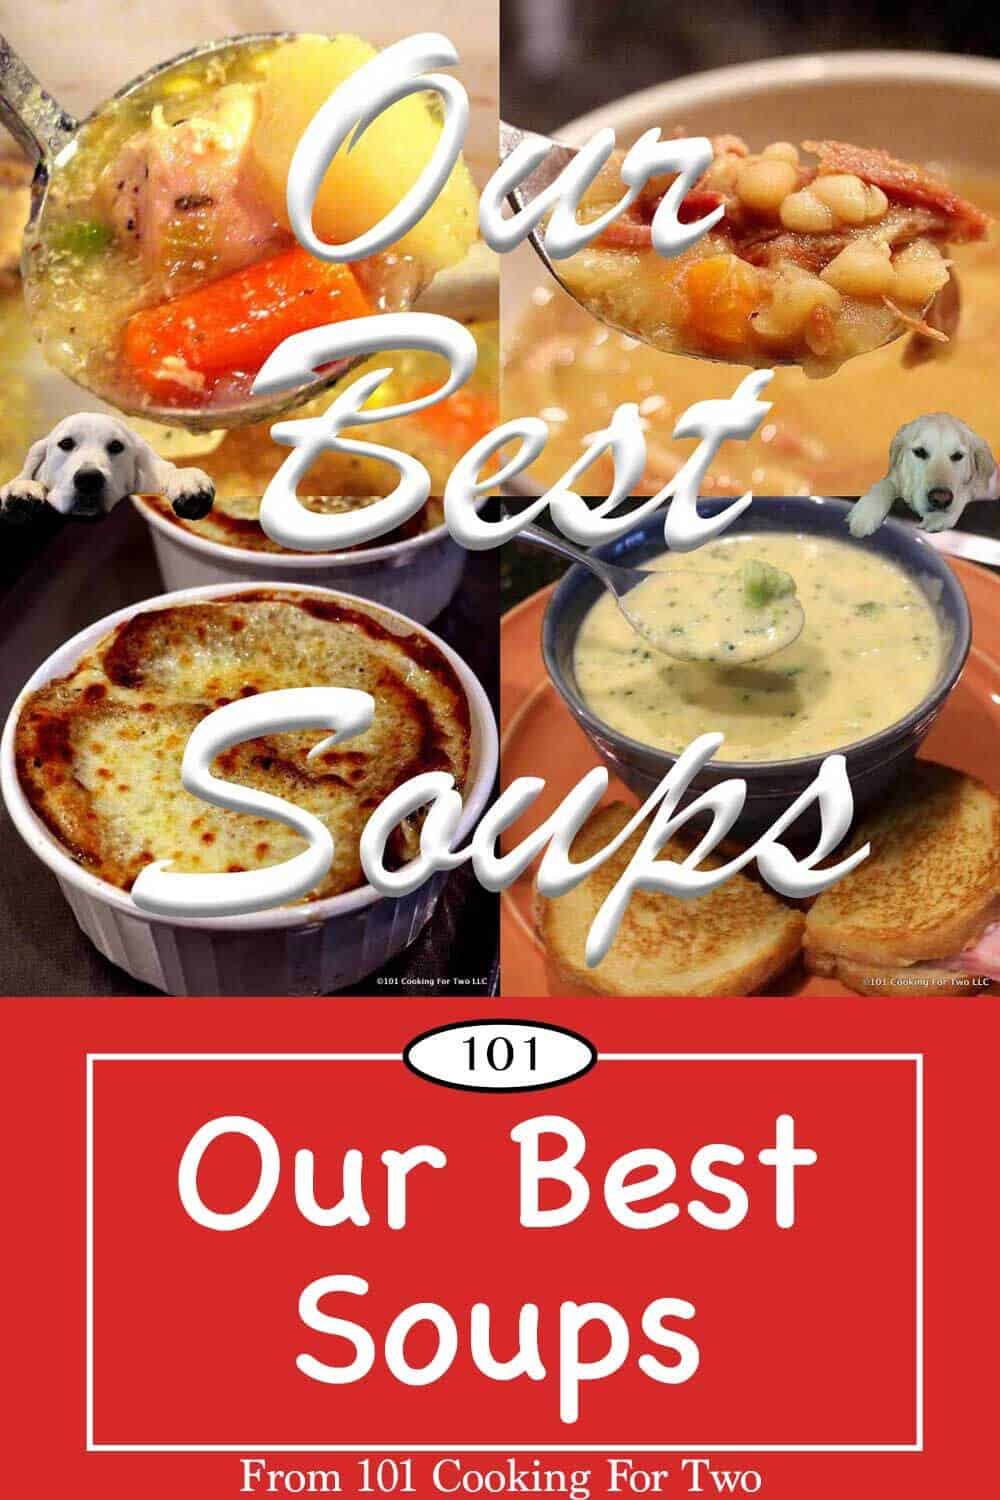 It's time for a roundup of ten of my best soups and stews. All with easy to follow step by step photo instructions to help you get it right the first time, every time. #BestSoup #SoupRoundup